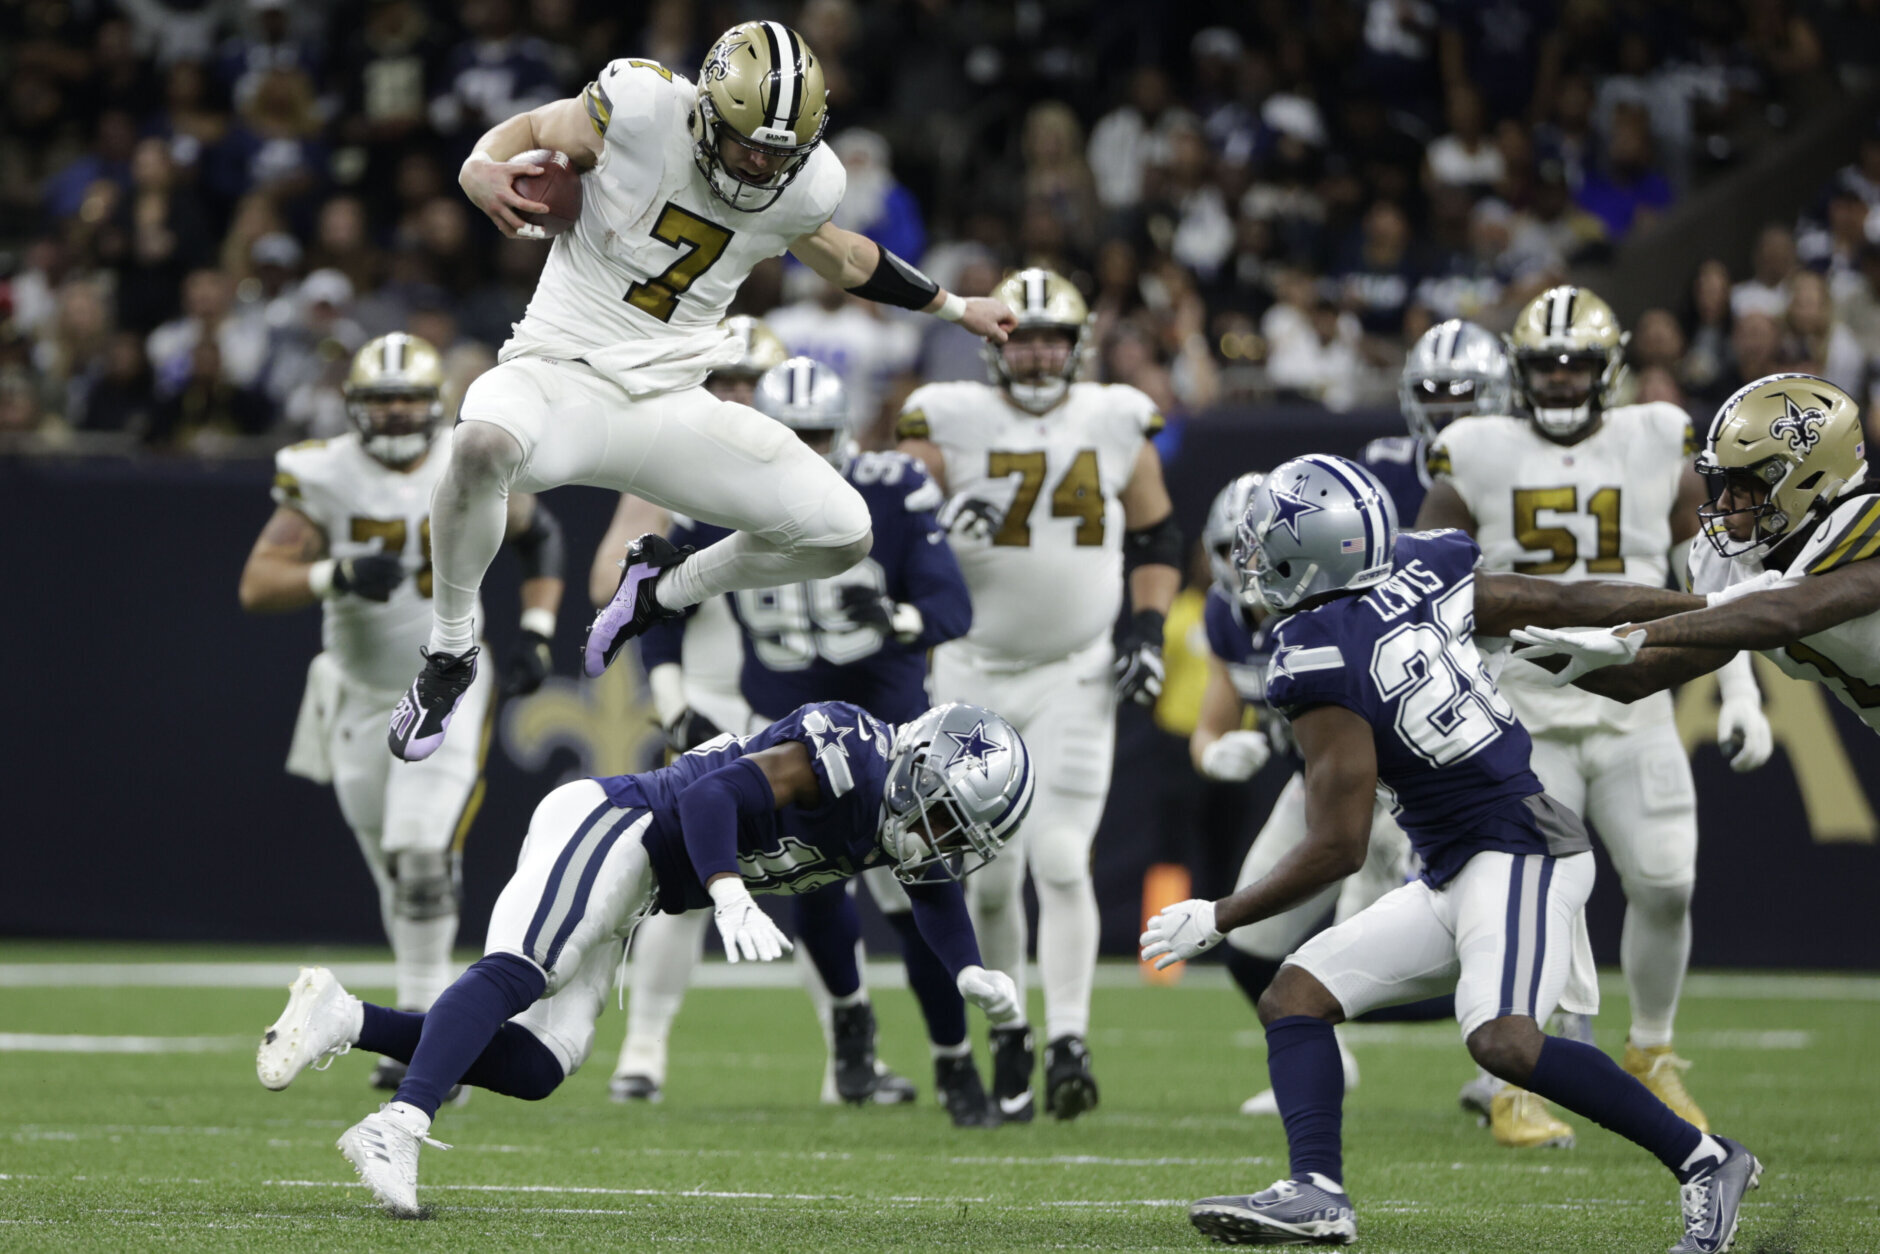 <p><em><strong>Cowboys 27</strong></em><br />
<em><strong>Saints 17</strong></em></p>
<p>I will never understand how Sean Payton can keep trying to make Taysom Hill a QB — and keep paying him a ton of money to fail at it — and still be considered a quarterback guru. If only Black QBs got such unlimited benefit of the doubt …</p>
